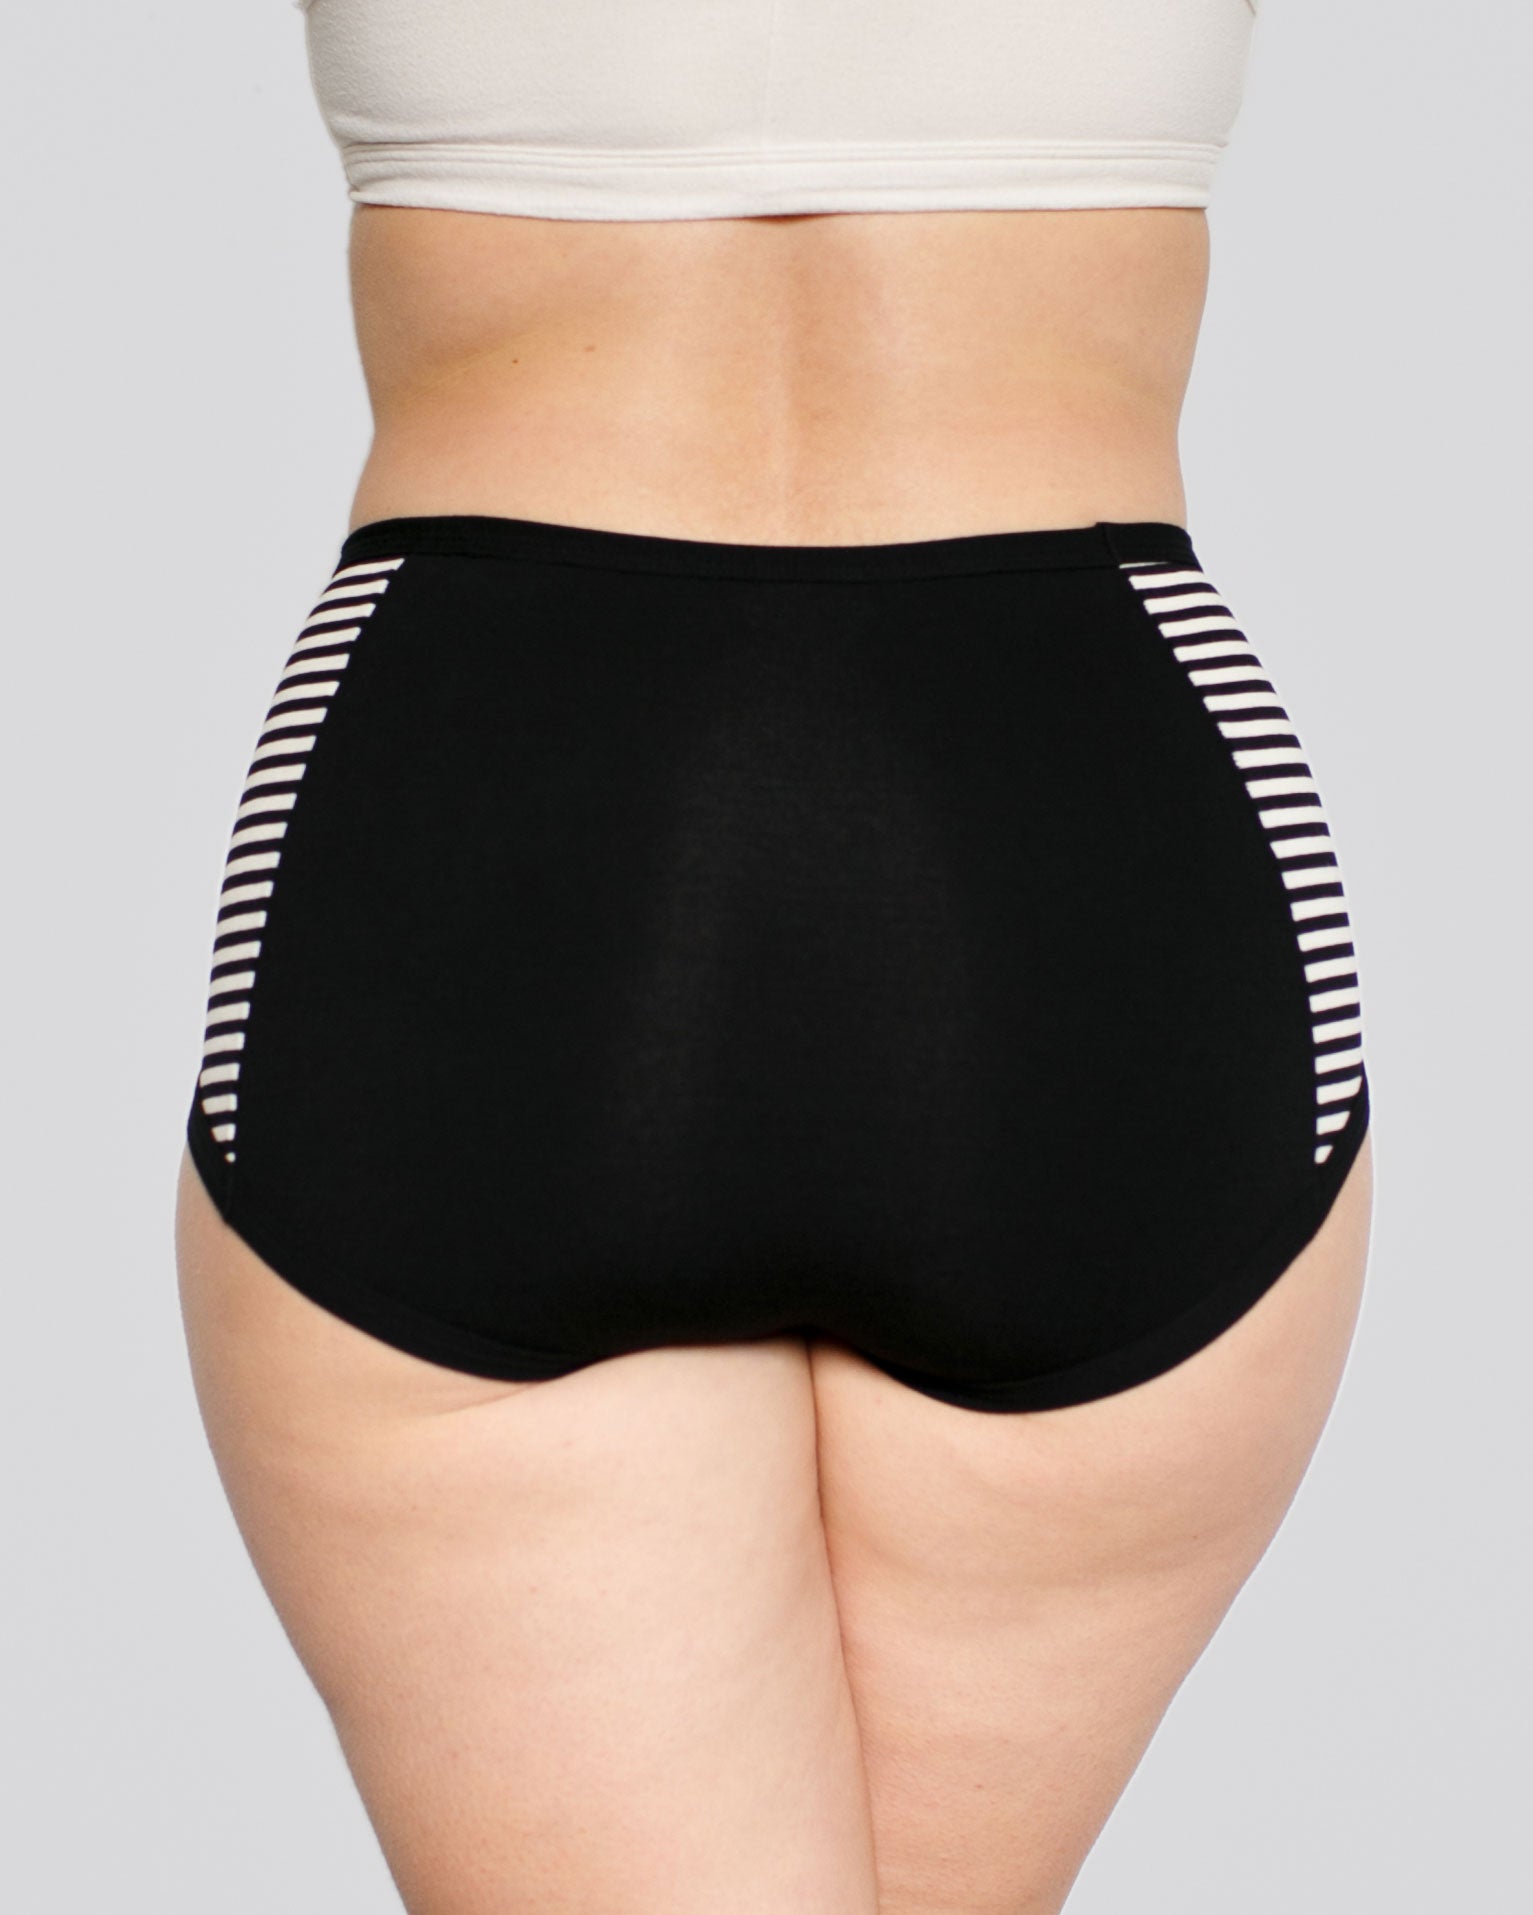 Model from the back wearing Thunderpants organic cotton Original Panel Pant style underwear with plain black center and black and white stripe sides.